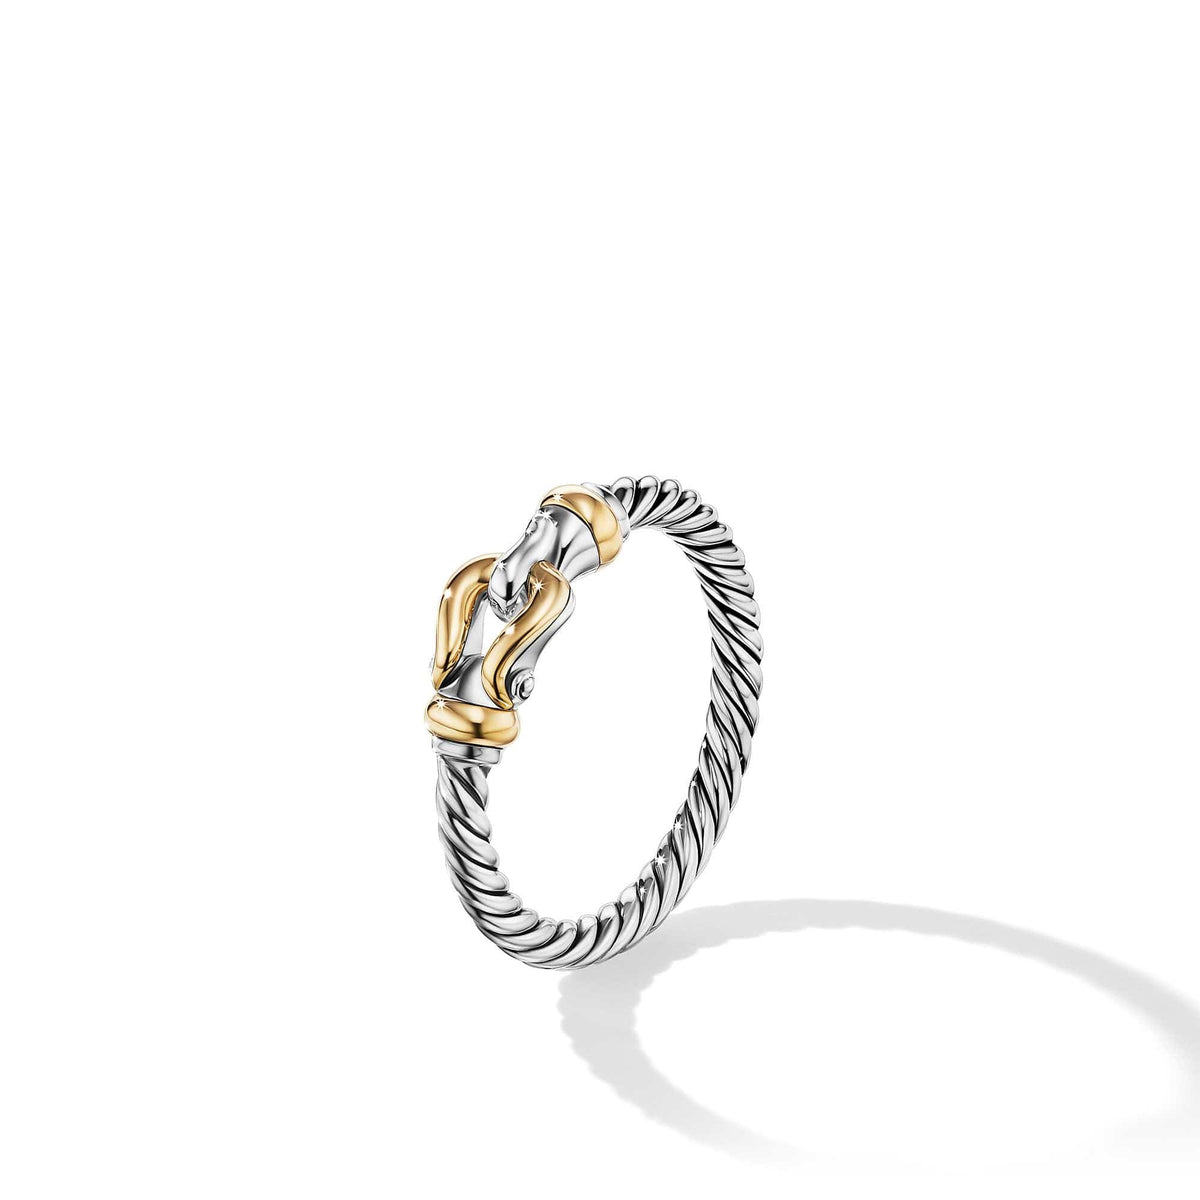 Petite Buckle Ring with 18K Yellow Gold